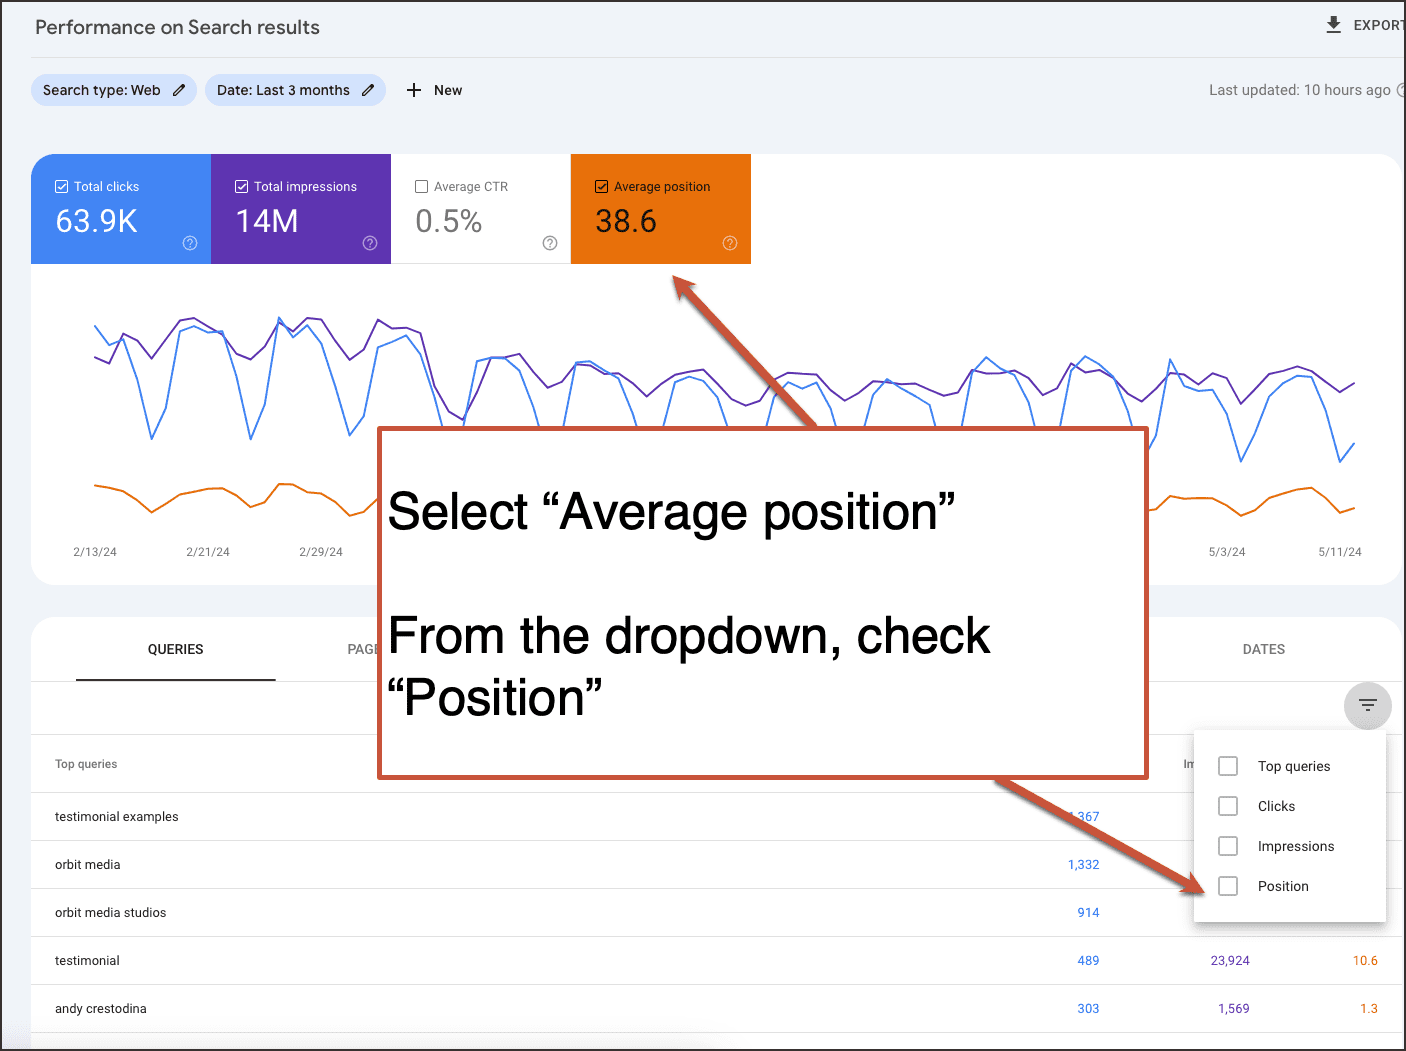 A screenshot of a performance report showcasing total clicks, impressions, average click-through rate, and average position, with an instructional overlay guiding to select "Average position" and check "Position" from the dropdown.